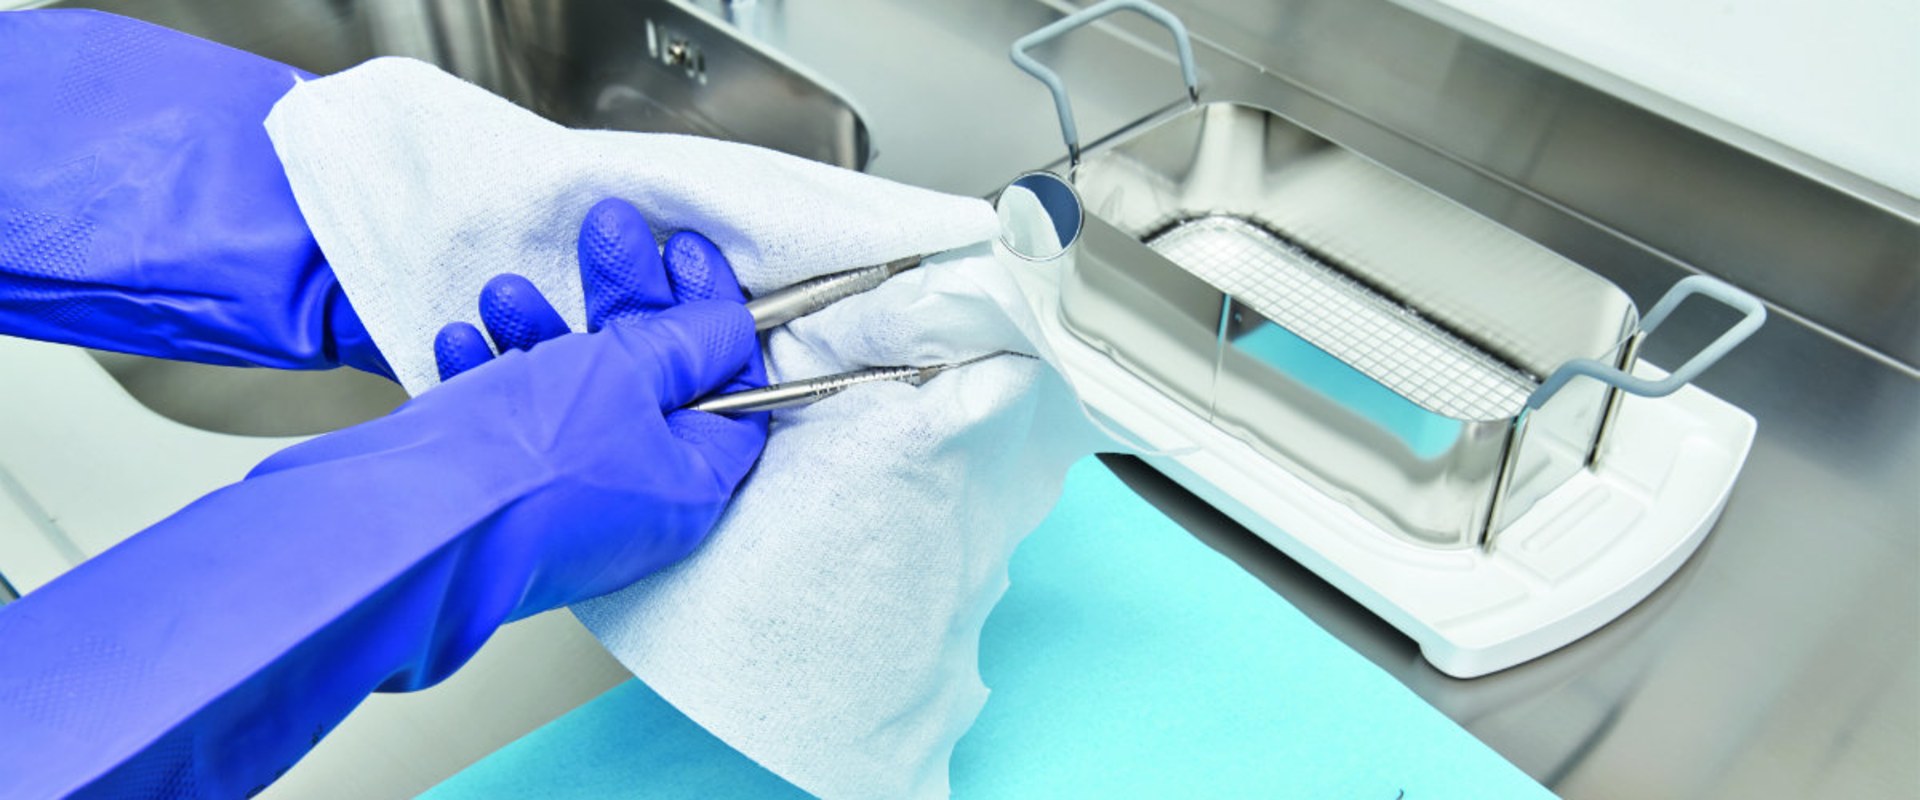 From Soaking To Sterilizing: The Step-By-Step Process Of Disinfecting Dentistry Tools In London's Dental Clinics